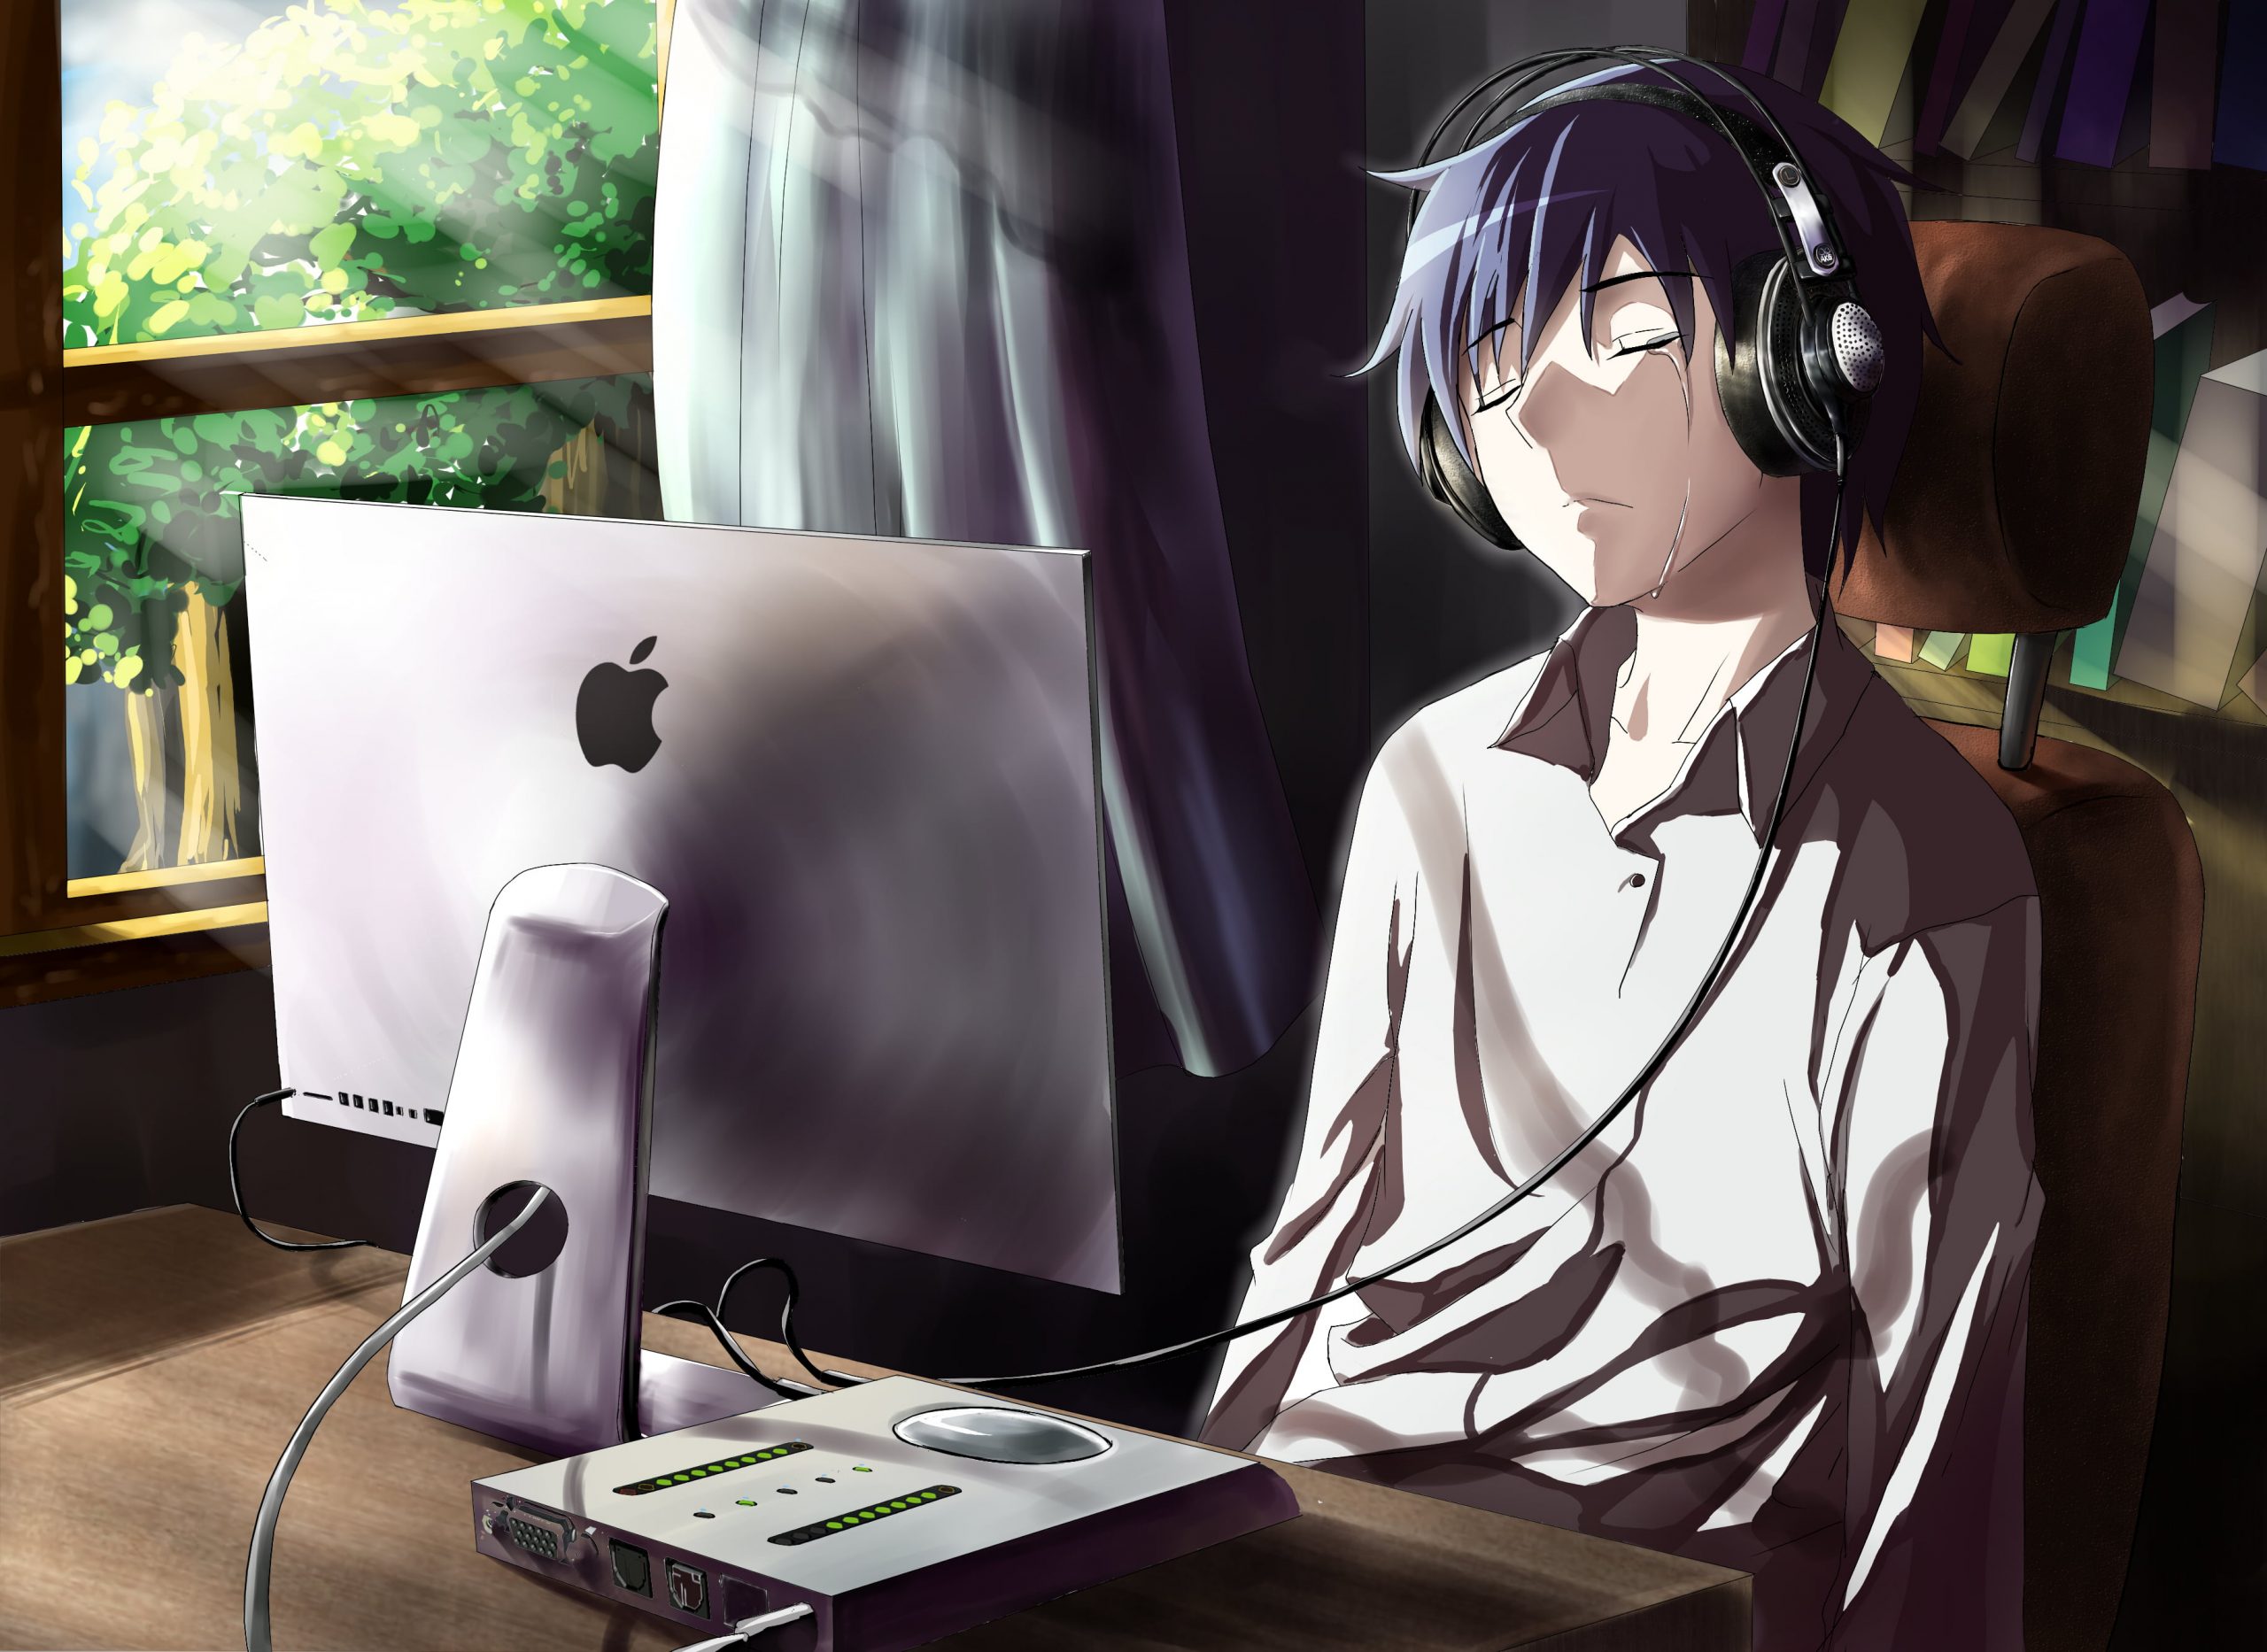 Male anime character in front iMac monitor illustration, guy wallpaper